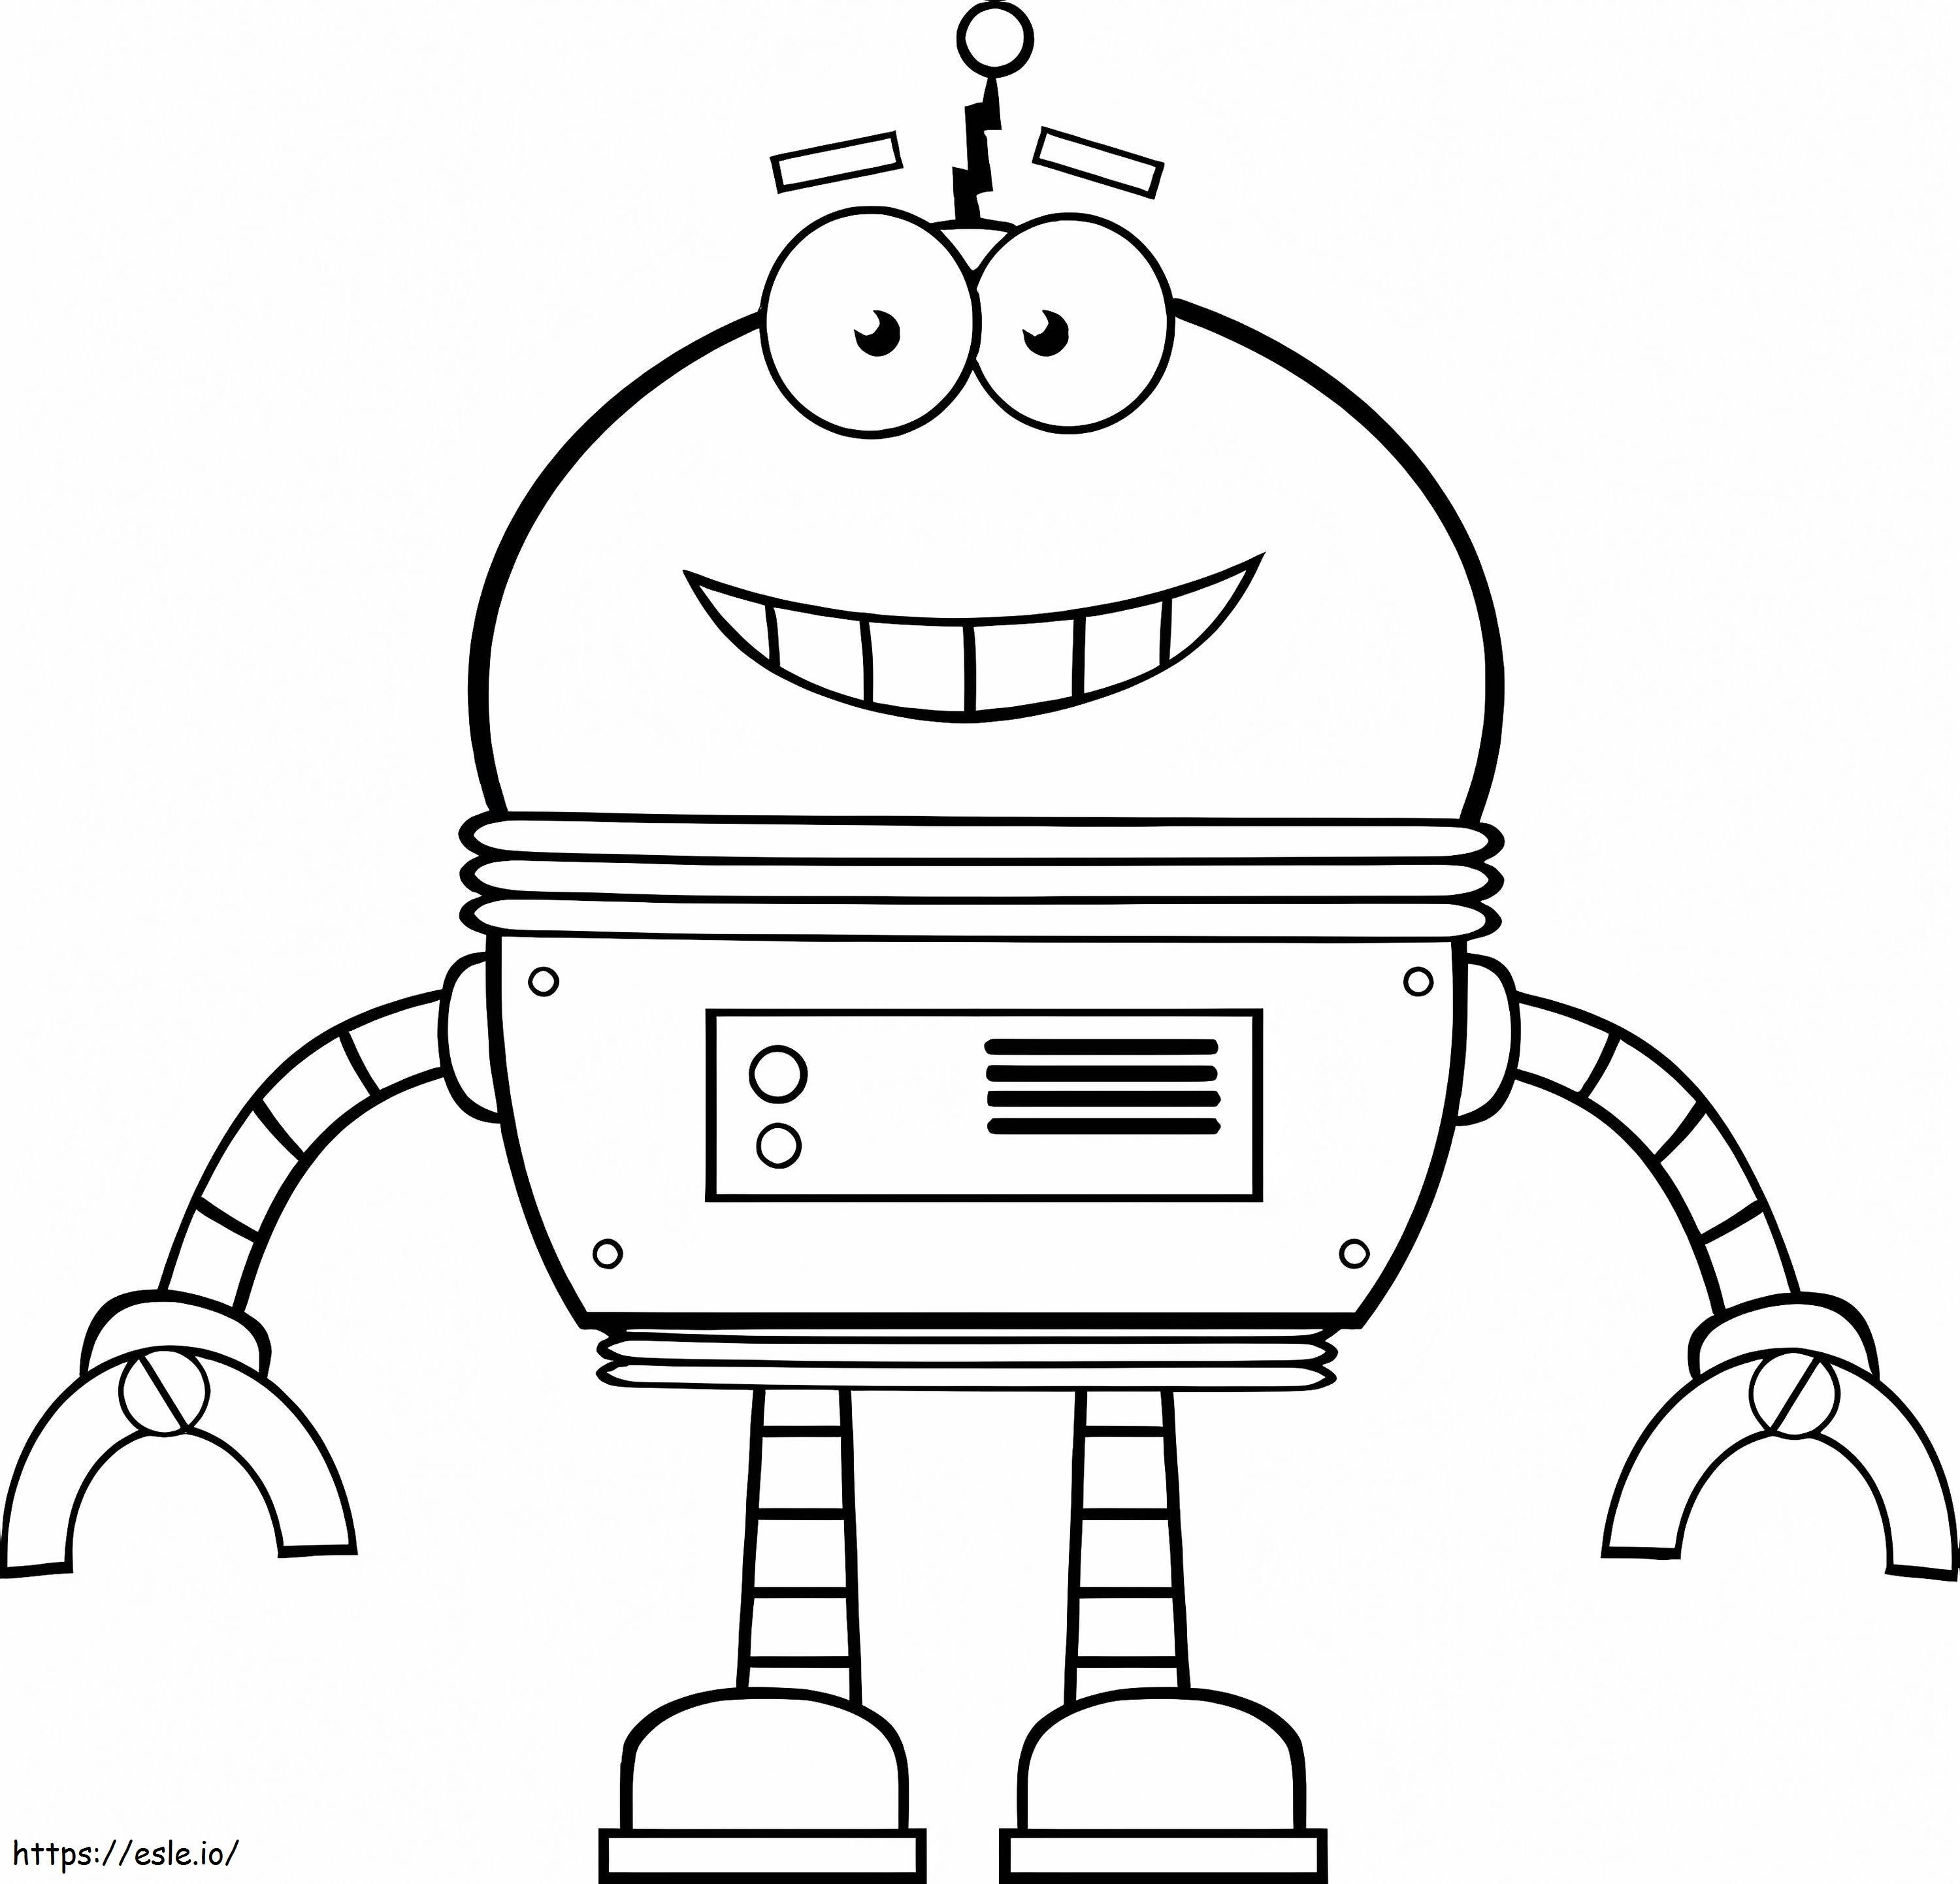 HQ Robot coloring page